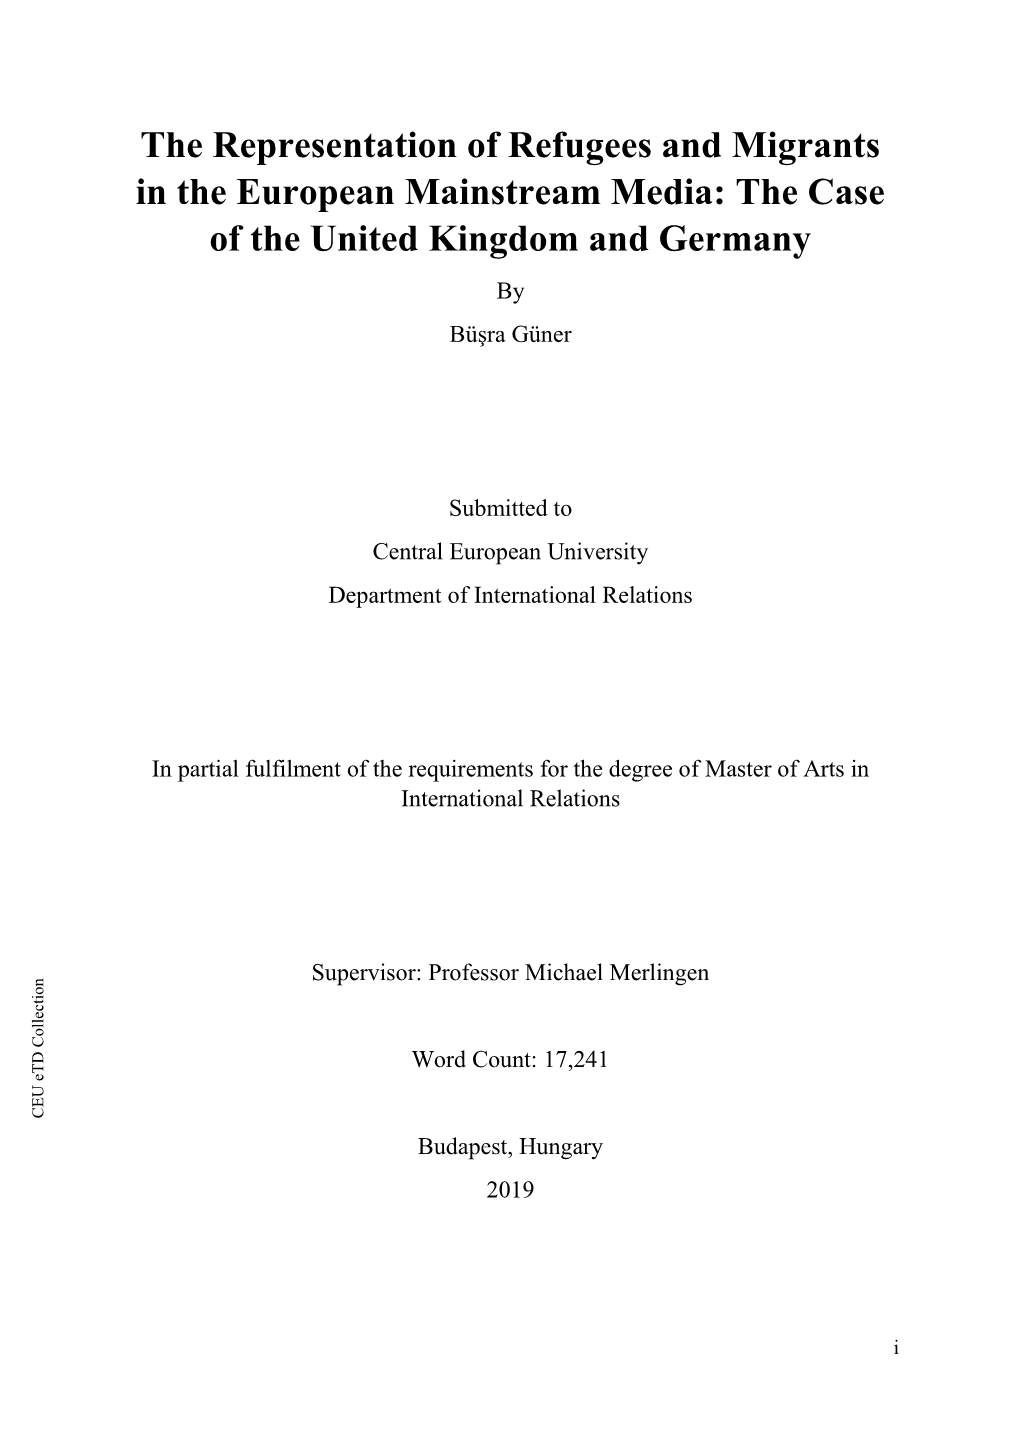 The Representation of Refugees and Migrants in the European Mainstream Media: the Case of the United Kingdom and Germany by Büşra Güner